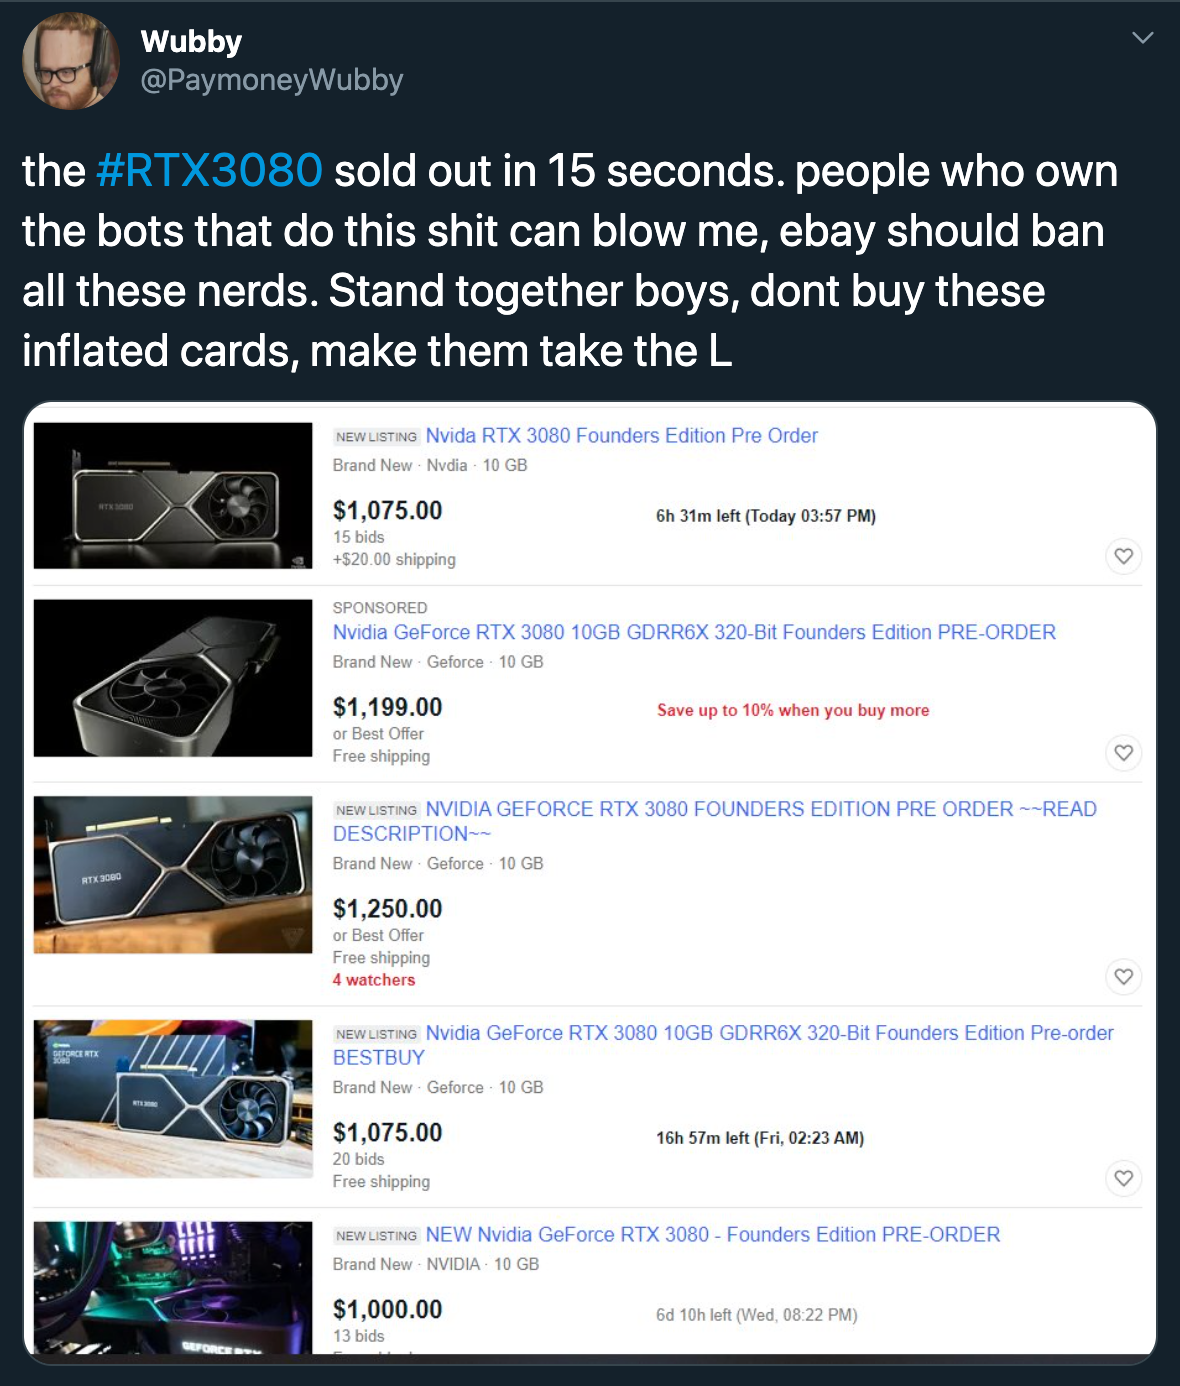 the rtx3080 sold out in 15 seconds. people who one the bots that do this shit can blow me, ebay should ban all these nerds. stand together boys, dont buy these inflated cards, make them take the L